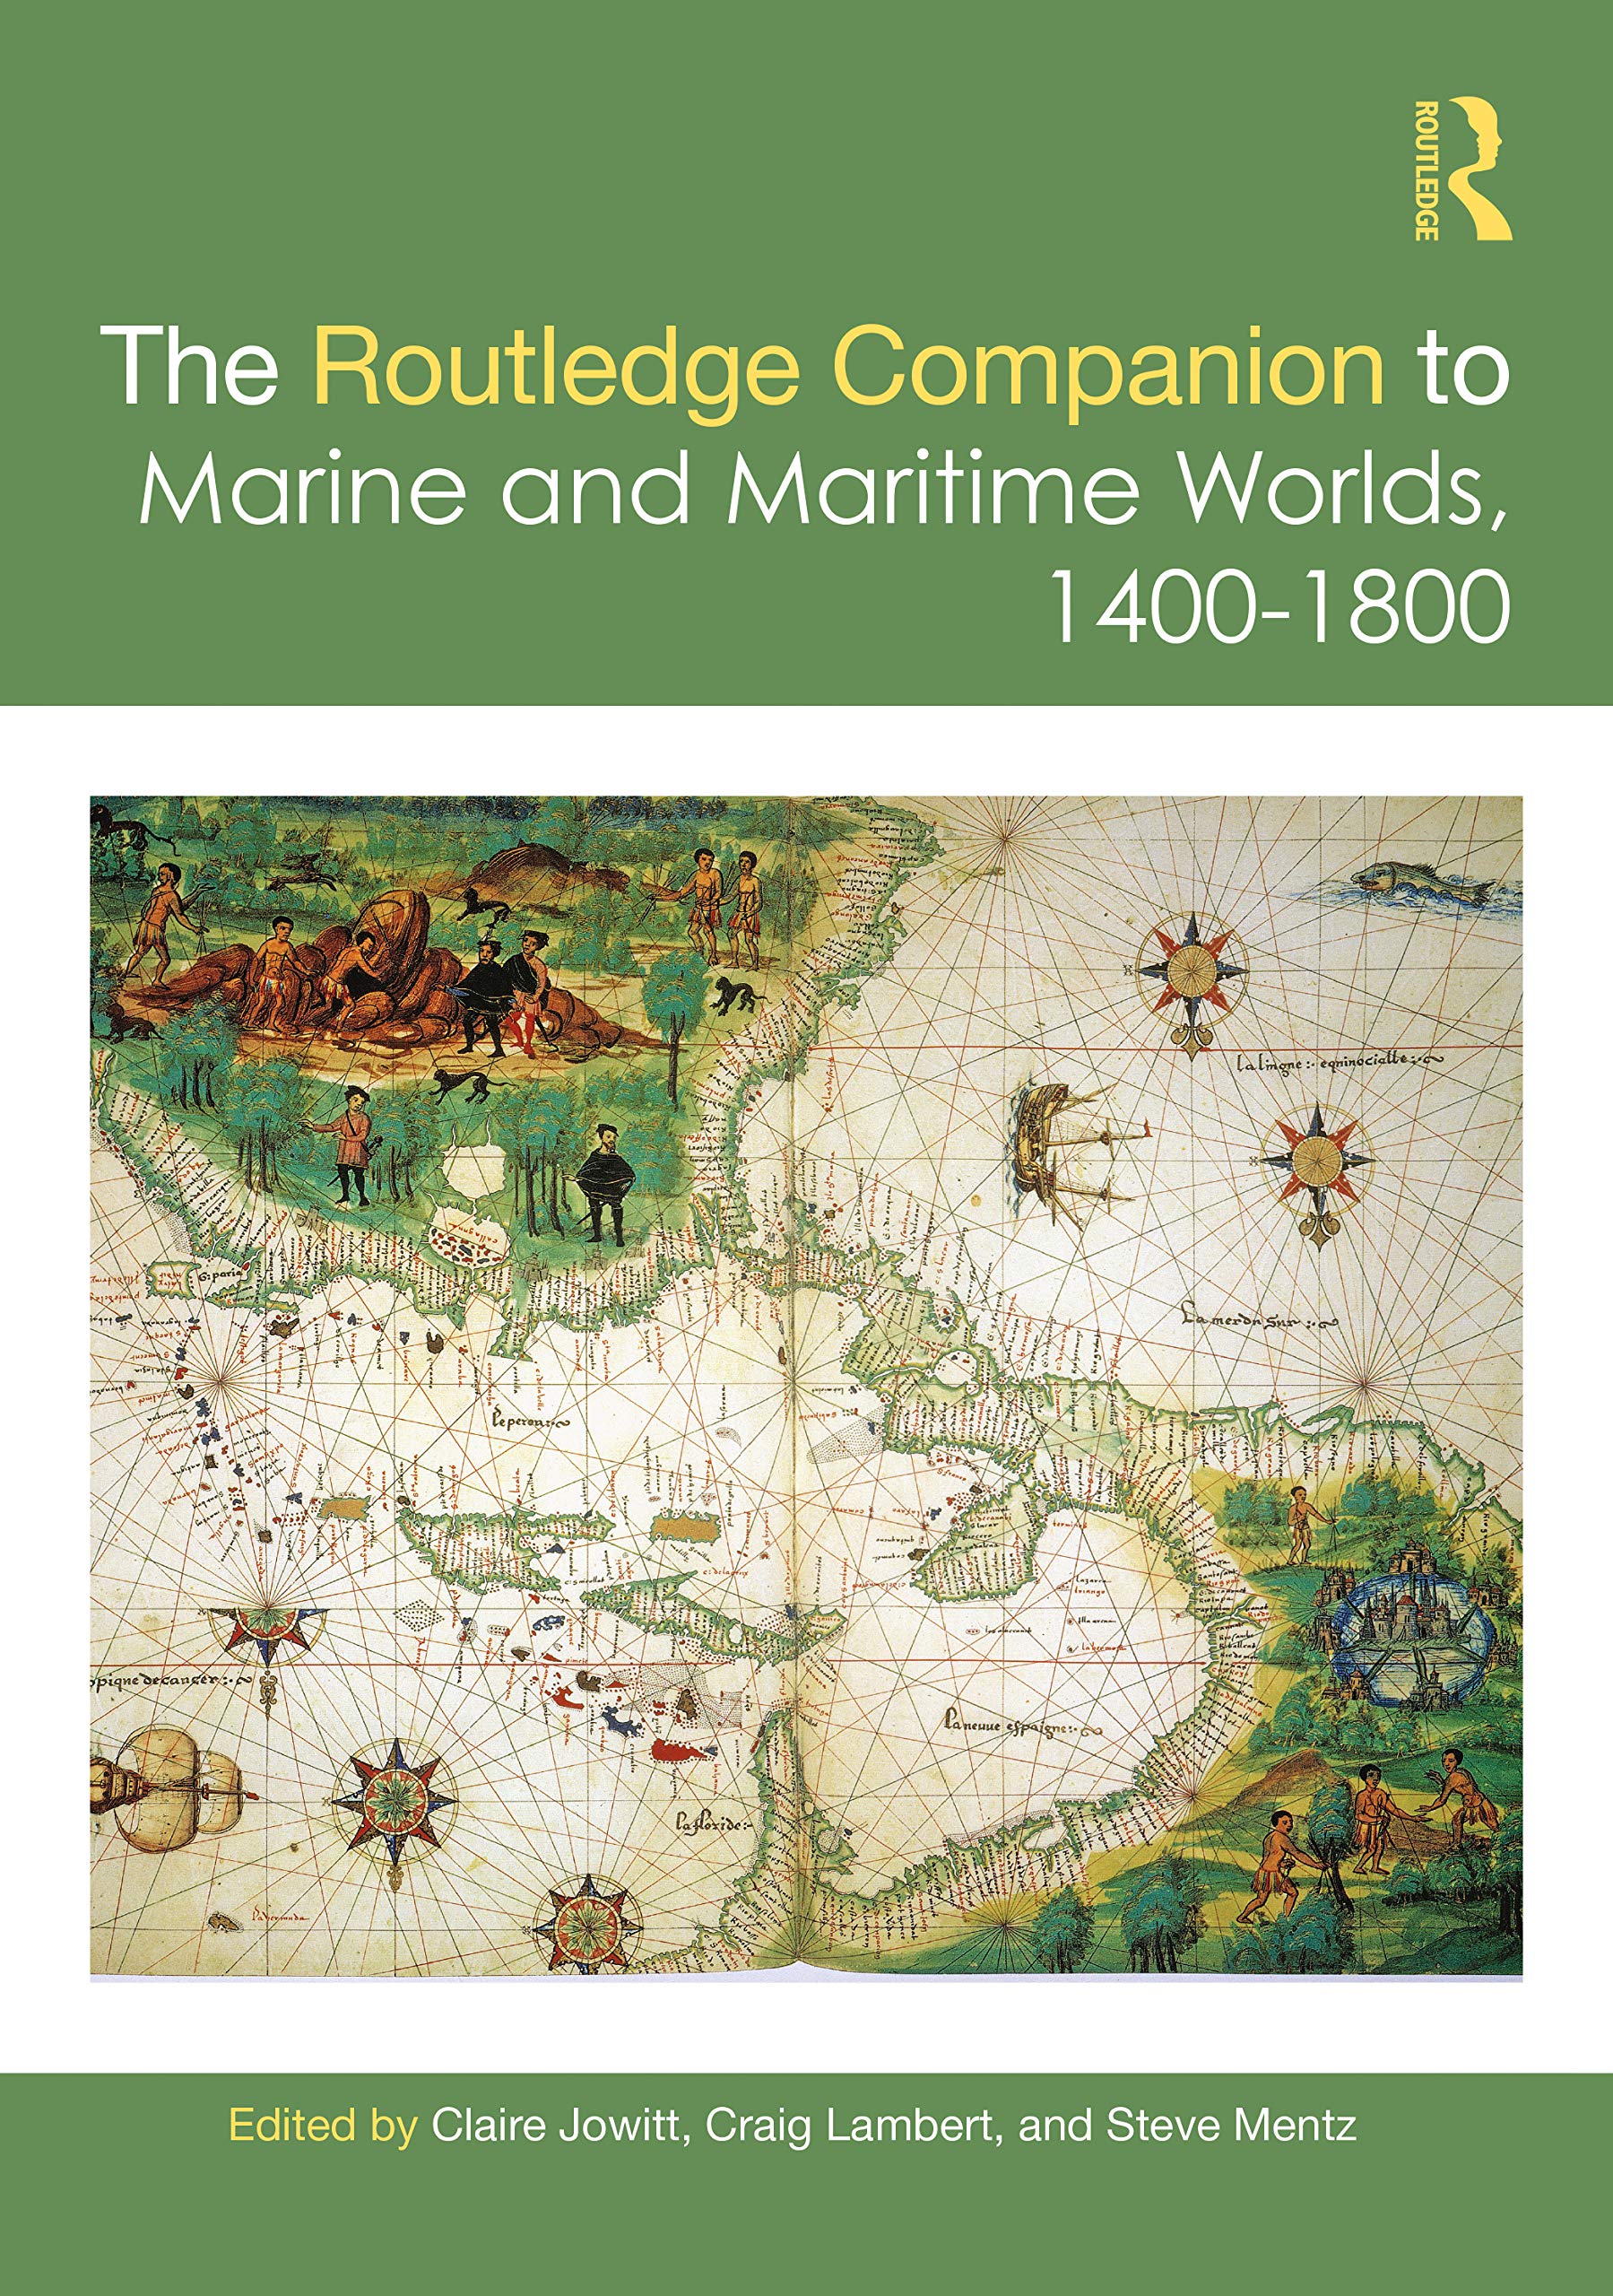 The Routledge Companion to Marine and Maritime Worlds 1400-1800 (Routledge Companions)